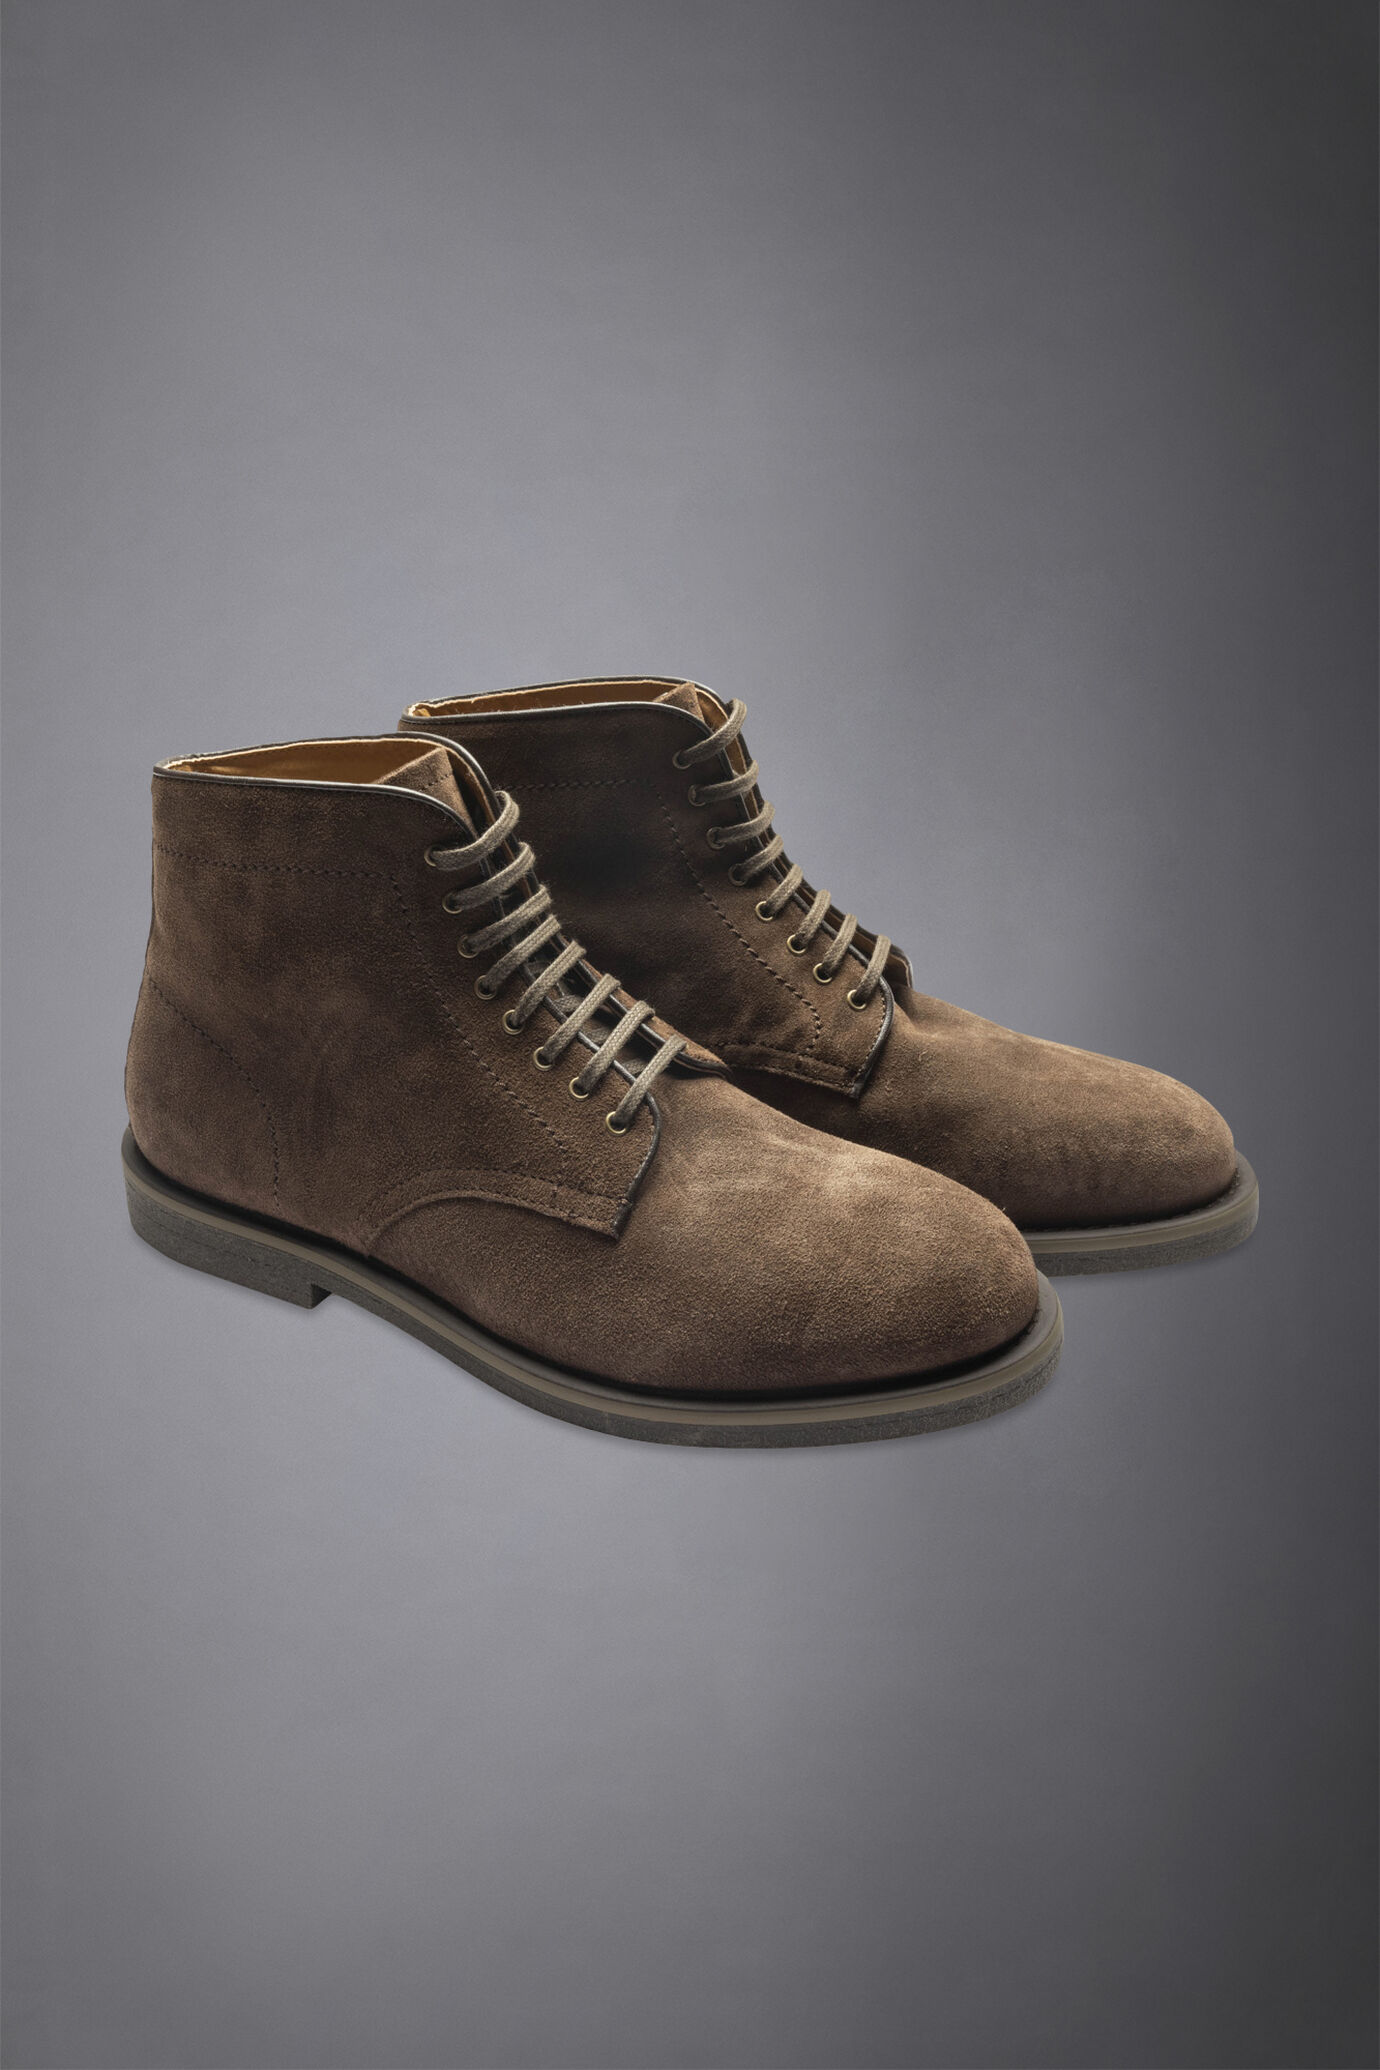 100% suede leather boots with rubber sole